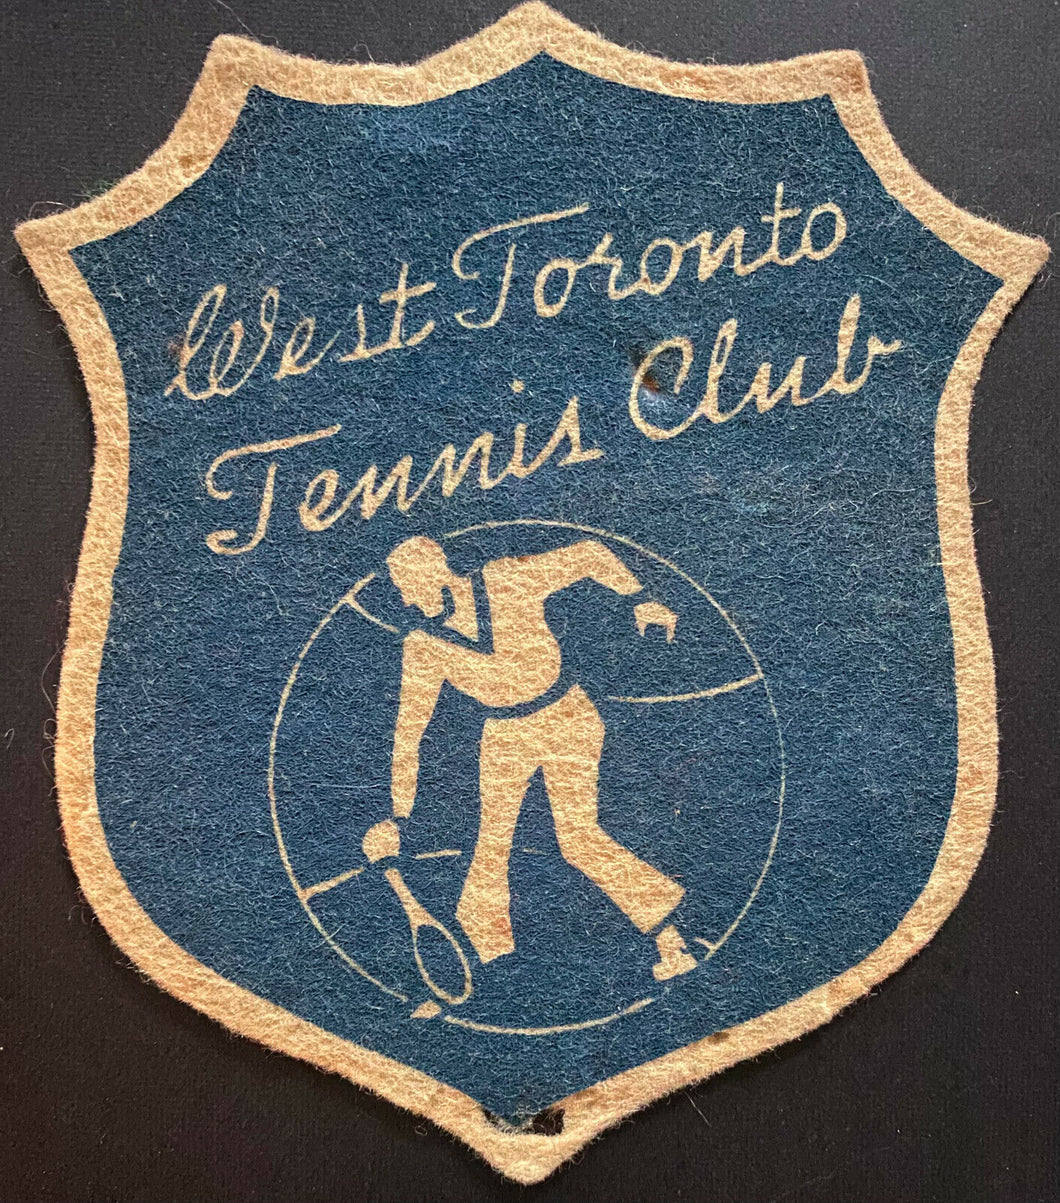 1930's West Toronto Tennis Club Vintage Players Patch Old Crest Canada